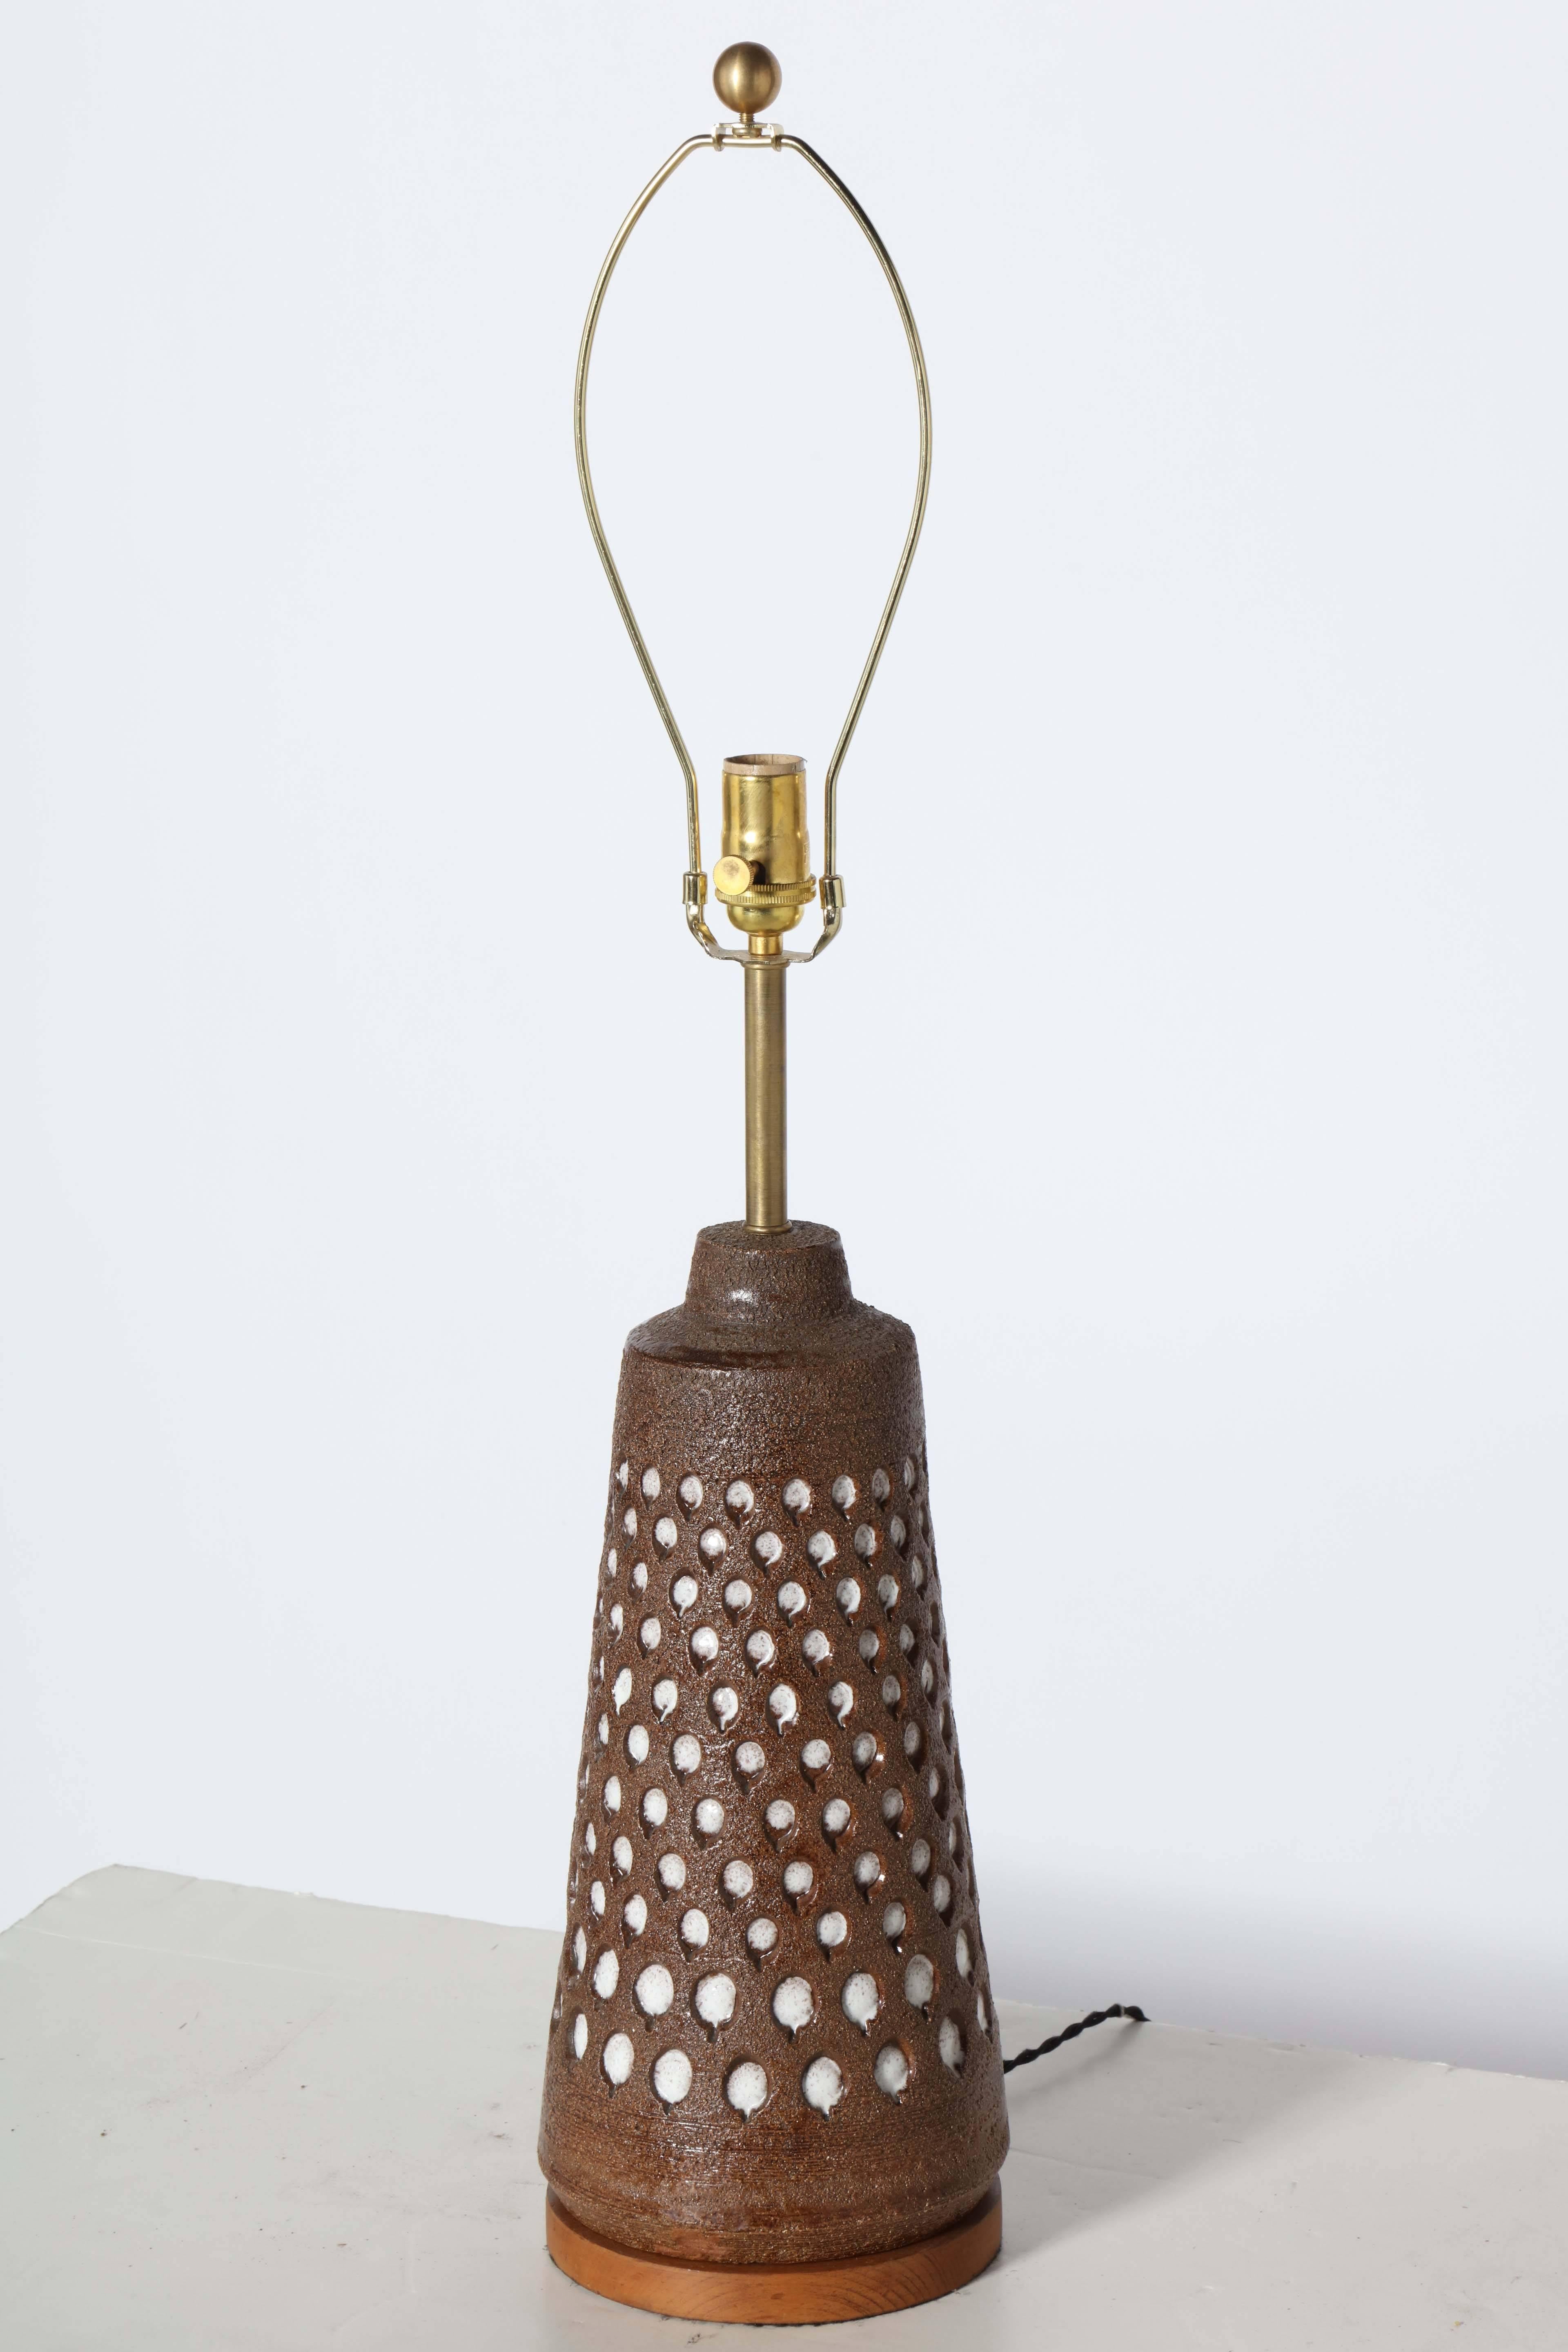 Large Aldo for Bitossi textured Deep Brown and White Polka Dot Ceramic Table Lamp, 1950's. Featuring a handcrafted textured Chamotte style deep chocolate brown glazed clay with impressed, hand painted diminishing glazed Bright White gloss oval